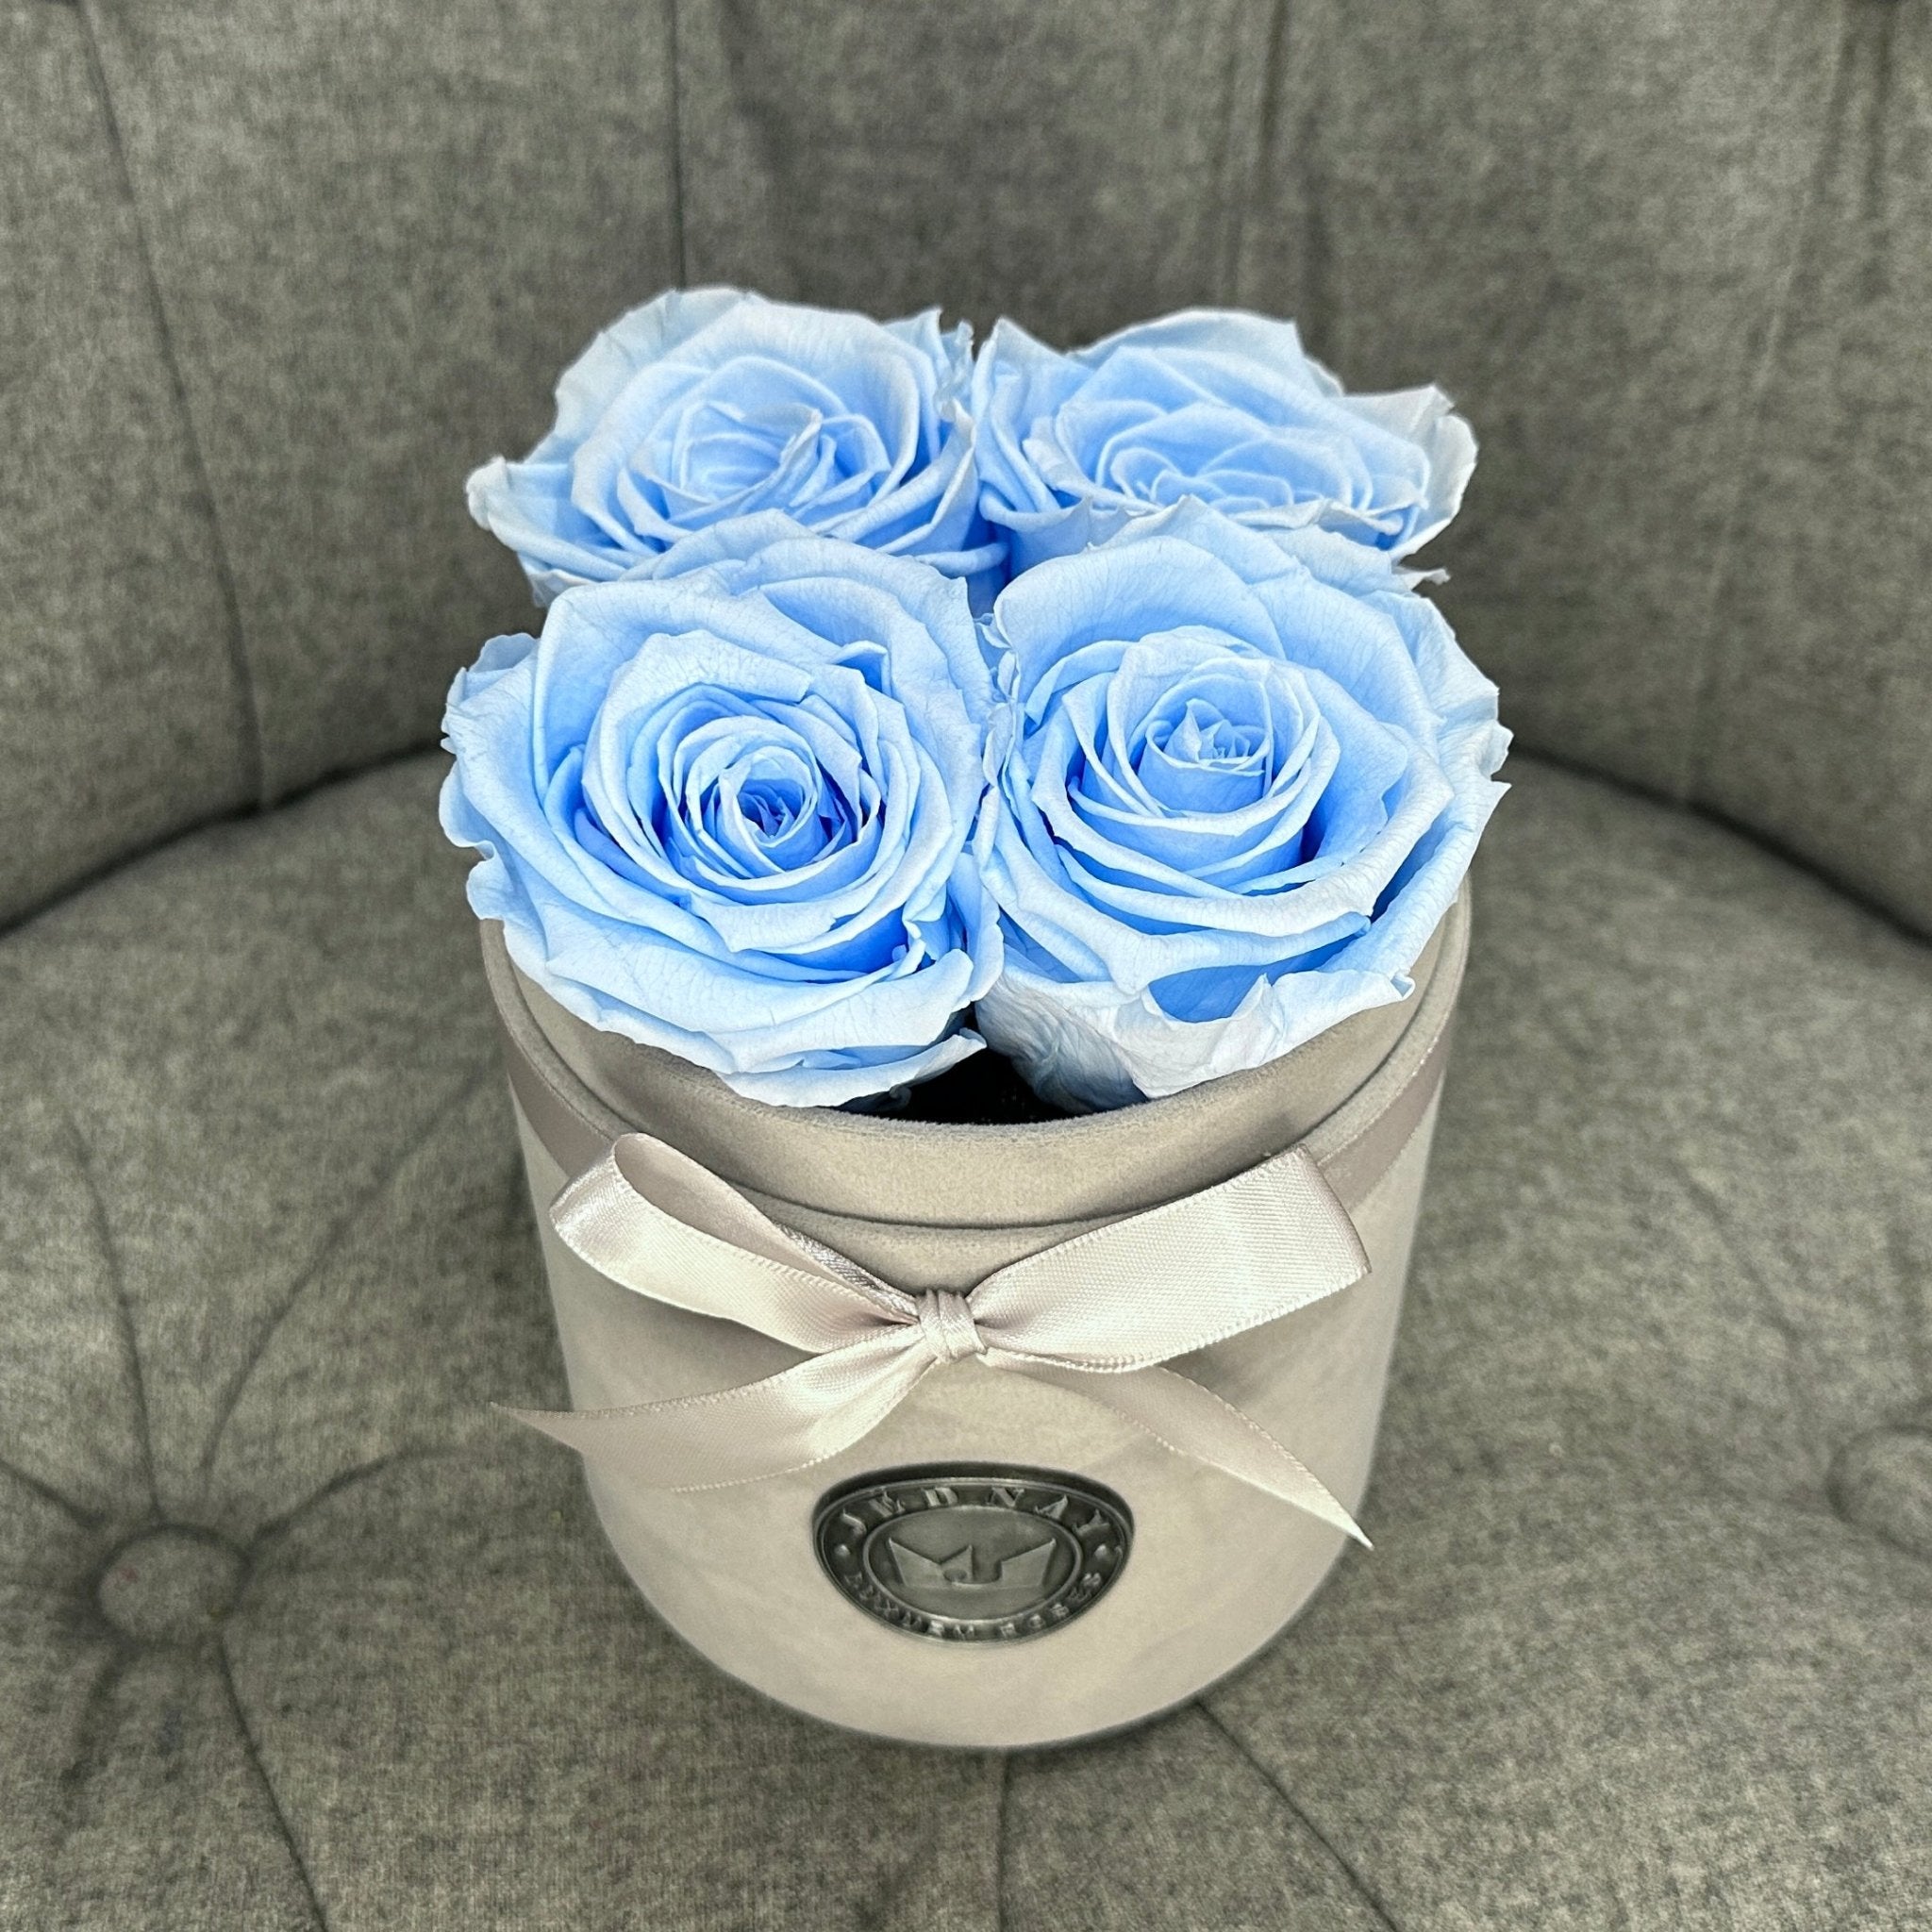 Petite Grey Suede Forever Rose Box - Sky Blue Eternal Roses - Jednay Roses